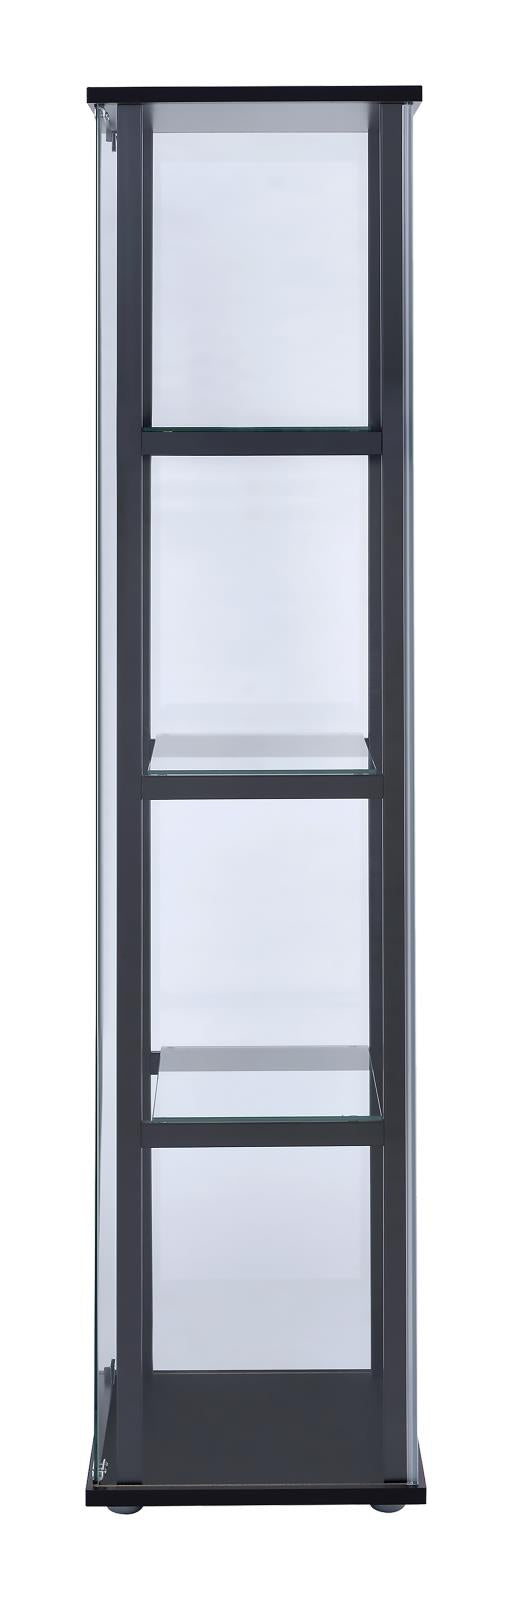 4-shelf Glass Curio Cabinet Black and Clear - What A Room